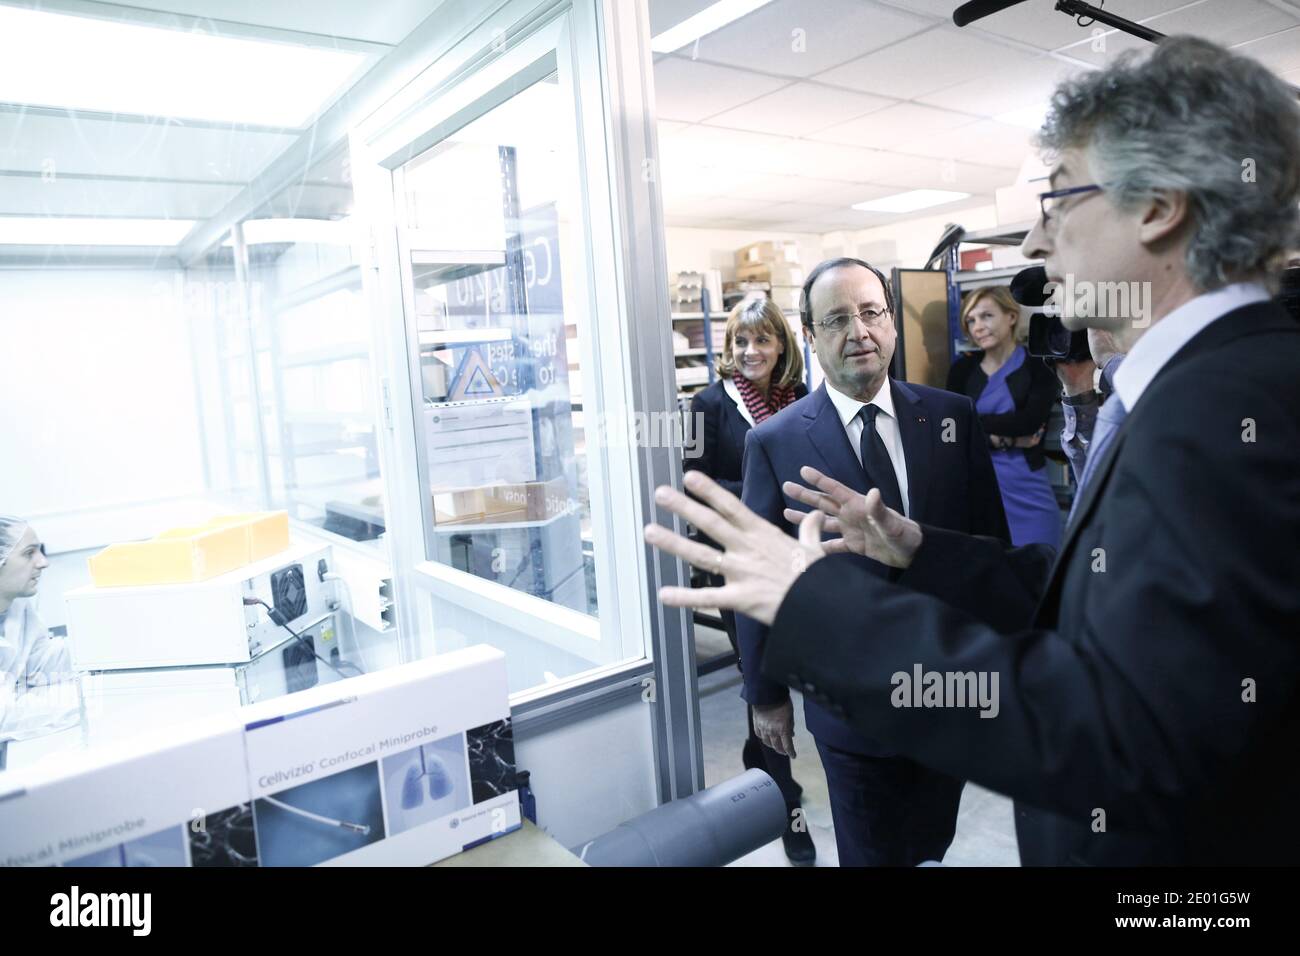 President Francois Hollande and Technology presidential adviser Anne Lauvergeon attend the presentation of Cellvizio, a Medical Endomicroscopy virtual assistant at Mauna Kea Technologies office in Paris, France, on December 2, 2013. Mauna Kea Technologies is leveraging a very strong experience in astronomical instrumentation for the development of powerful medical devices, that can provide real time microscopic imaging in the living body. Photo by Denis Allard/Pool/ABACAPRESS.COM Stock Photo